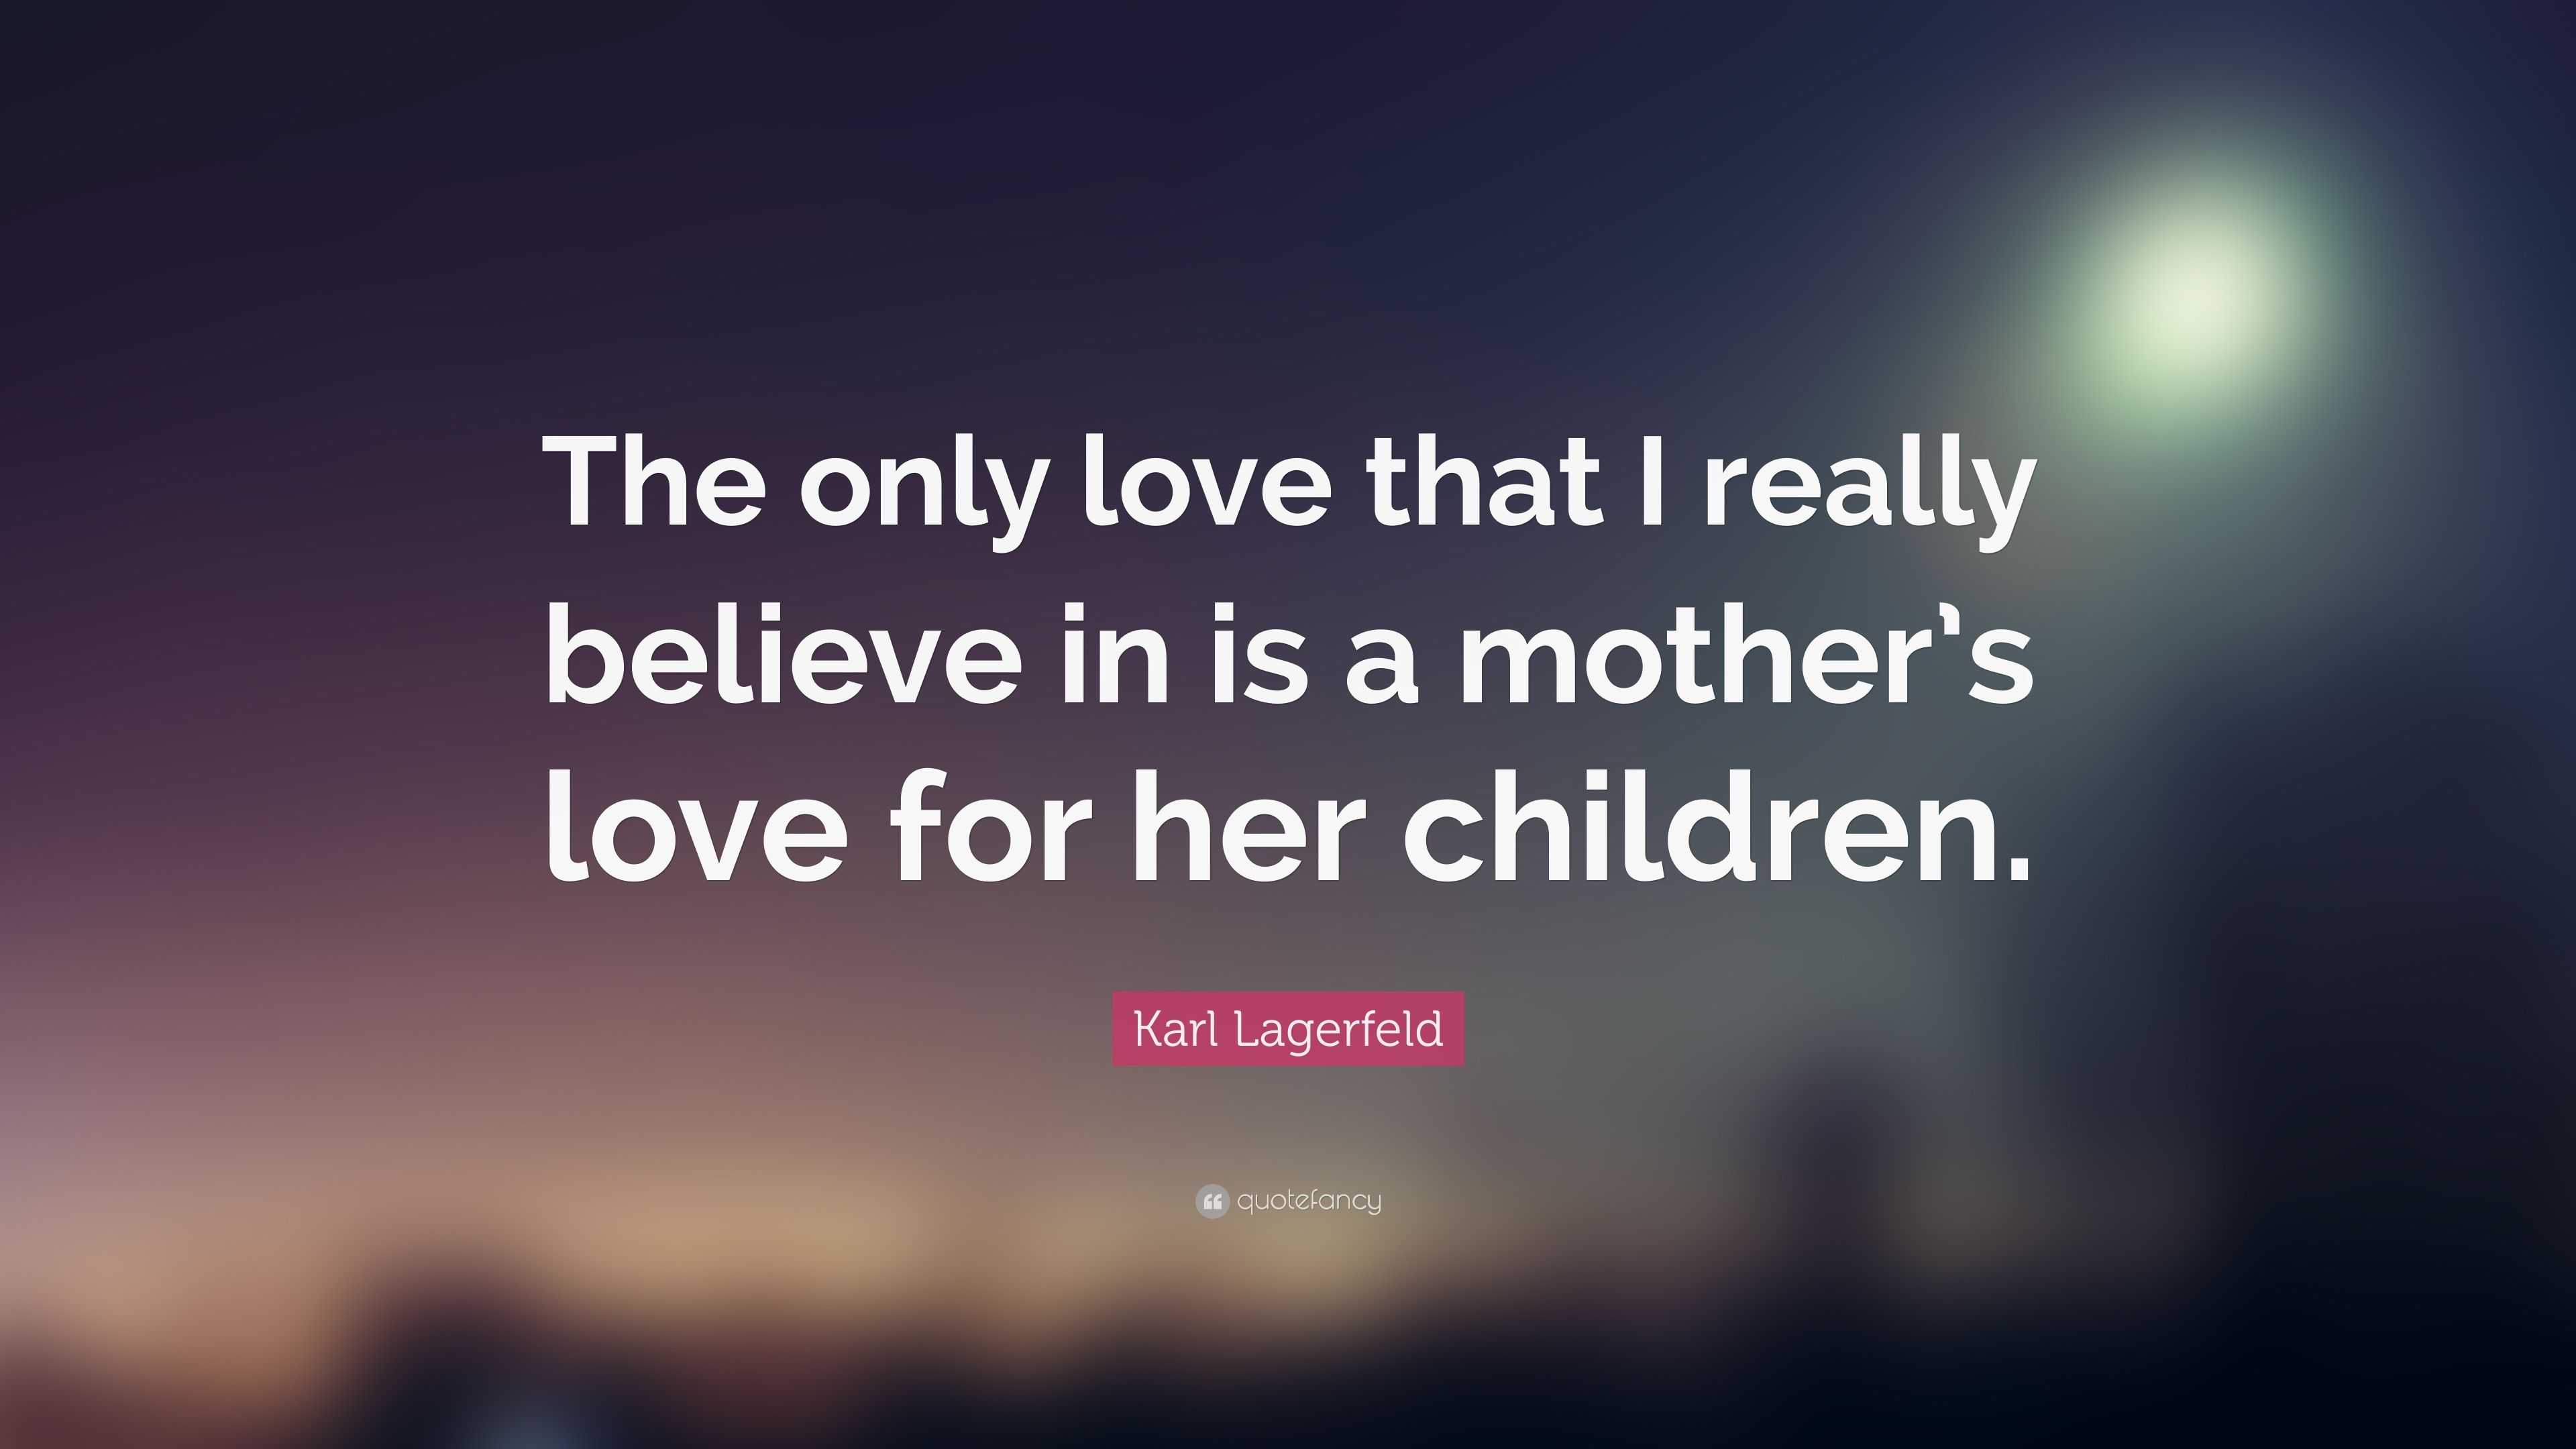 Karl Lagerfeld Quote: “The only love that I really believe in is a ...